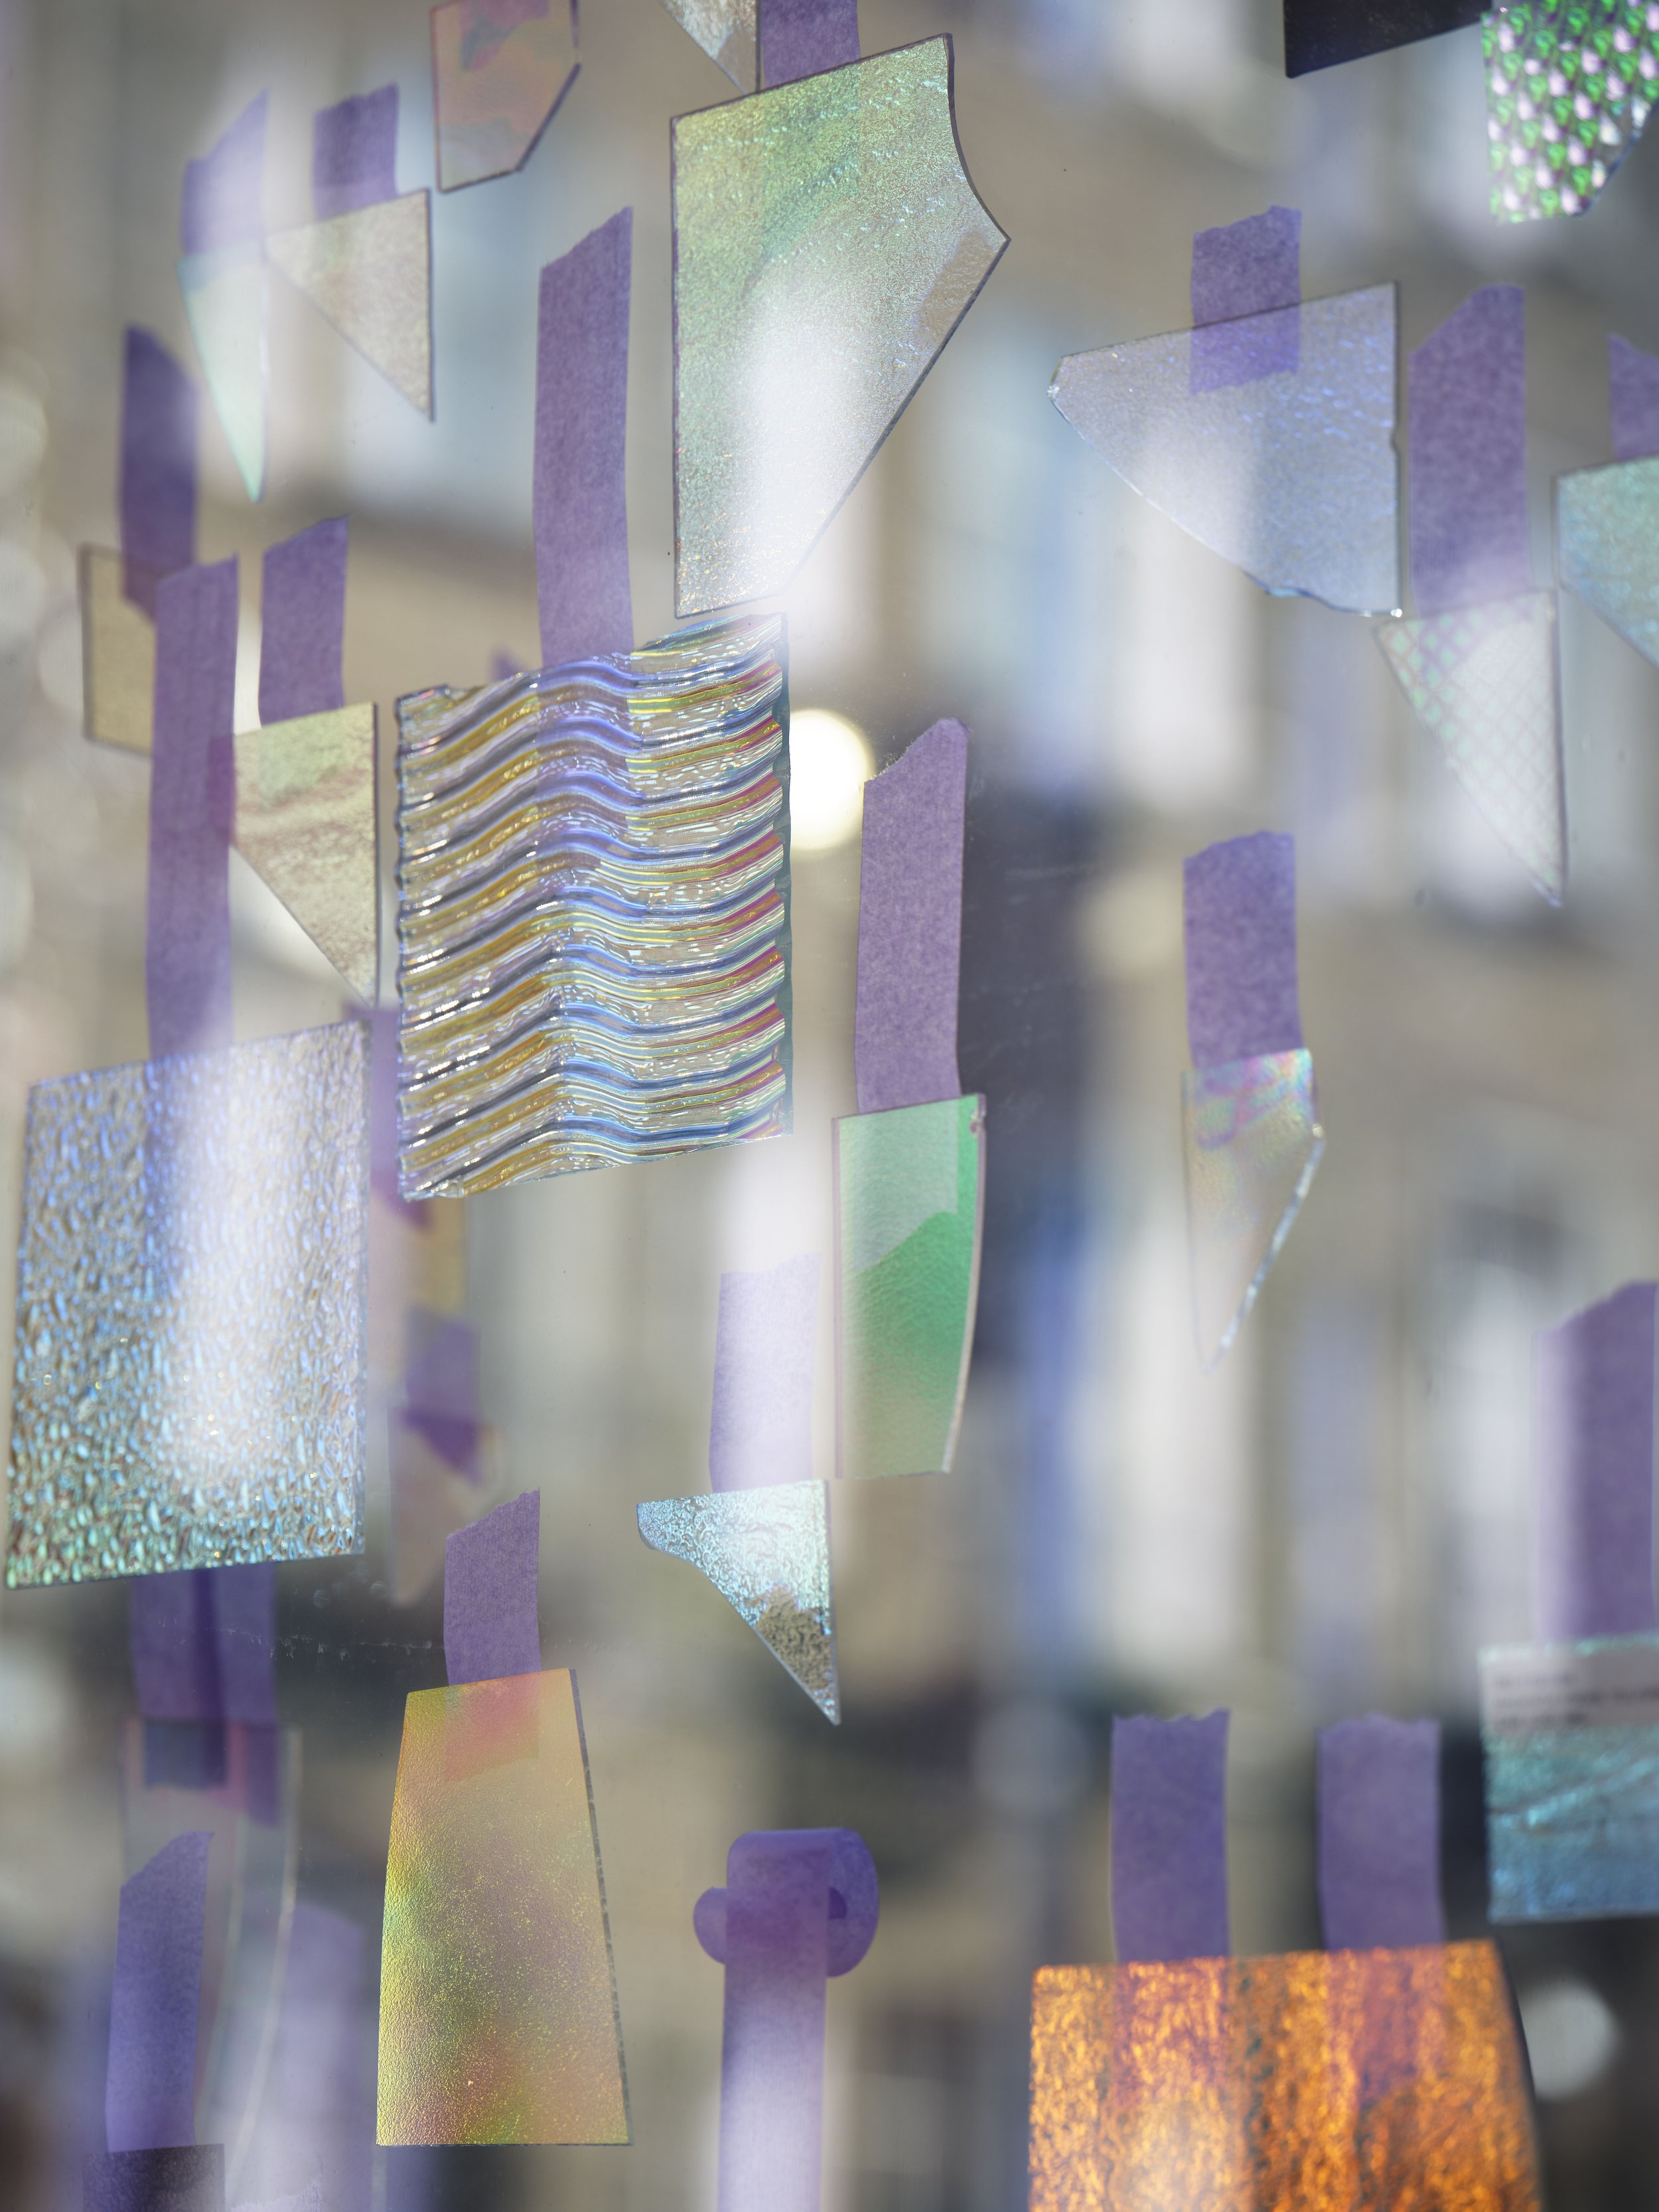  Dykro Stained Glass  Dichroic glass, lavendar masking tape, light, dimensions variable, 2023 